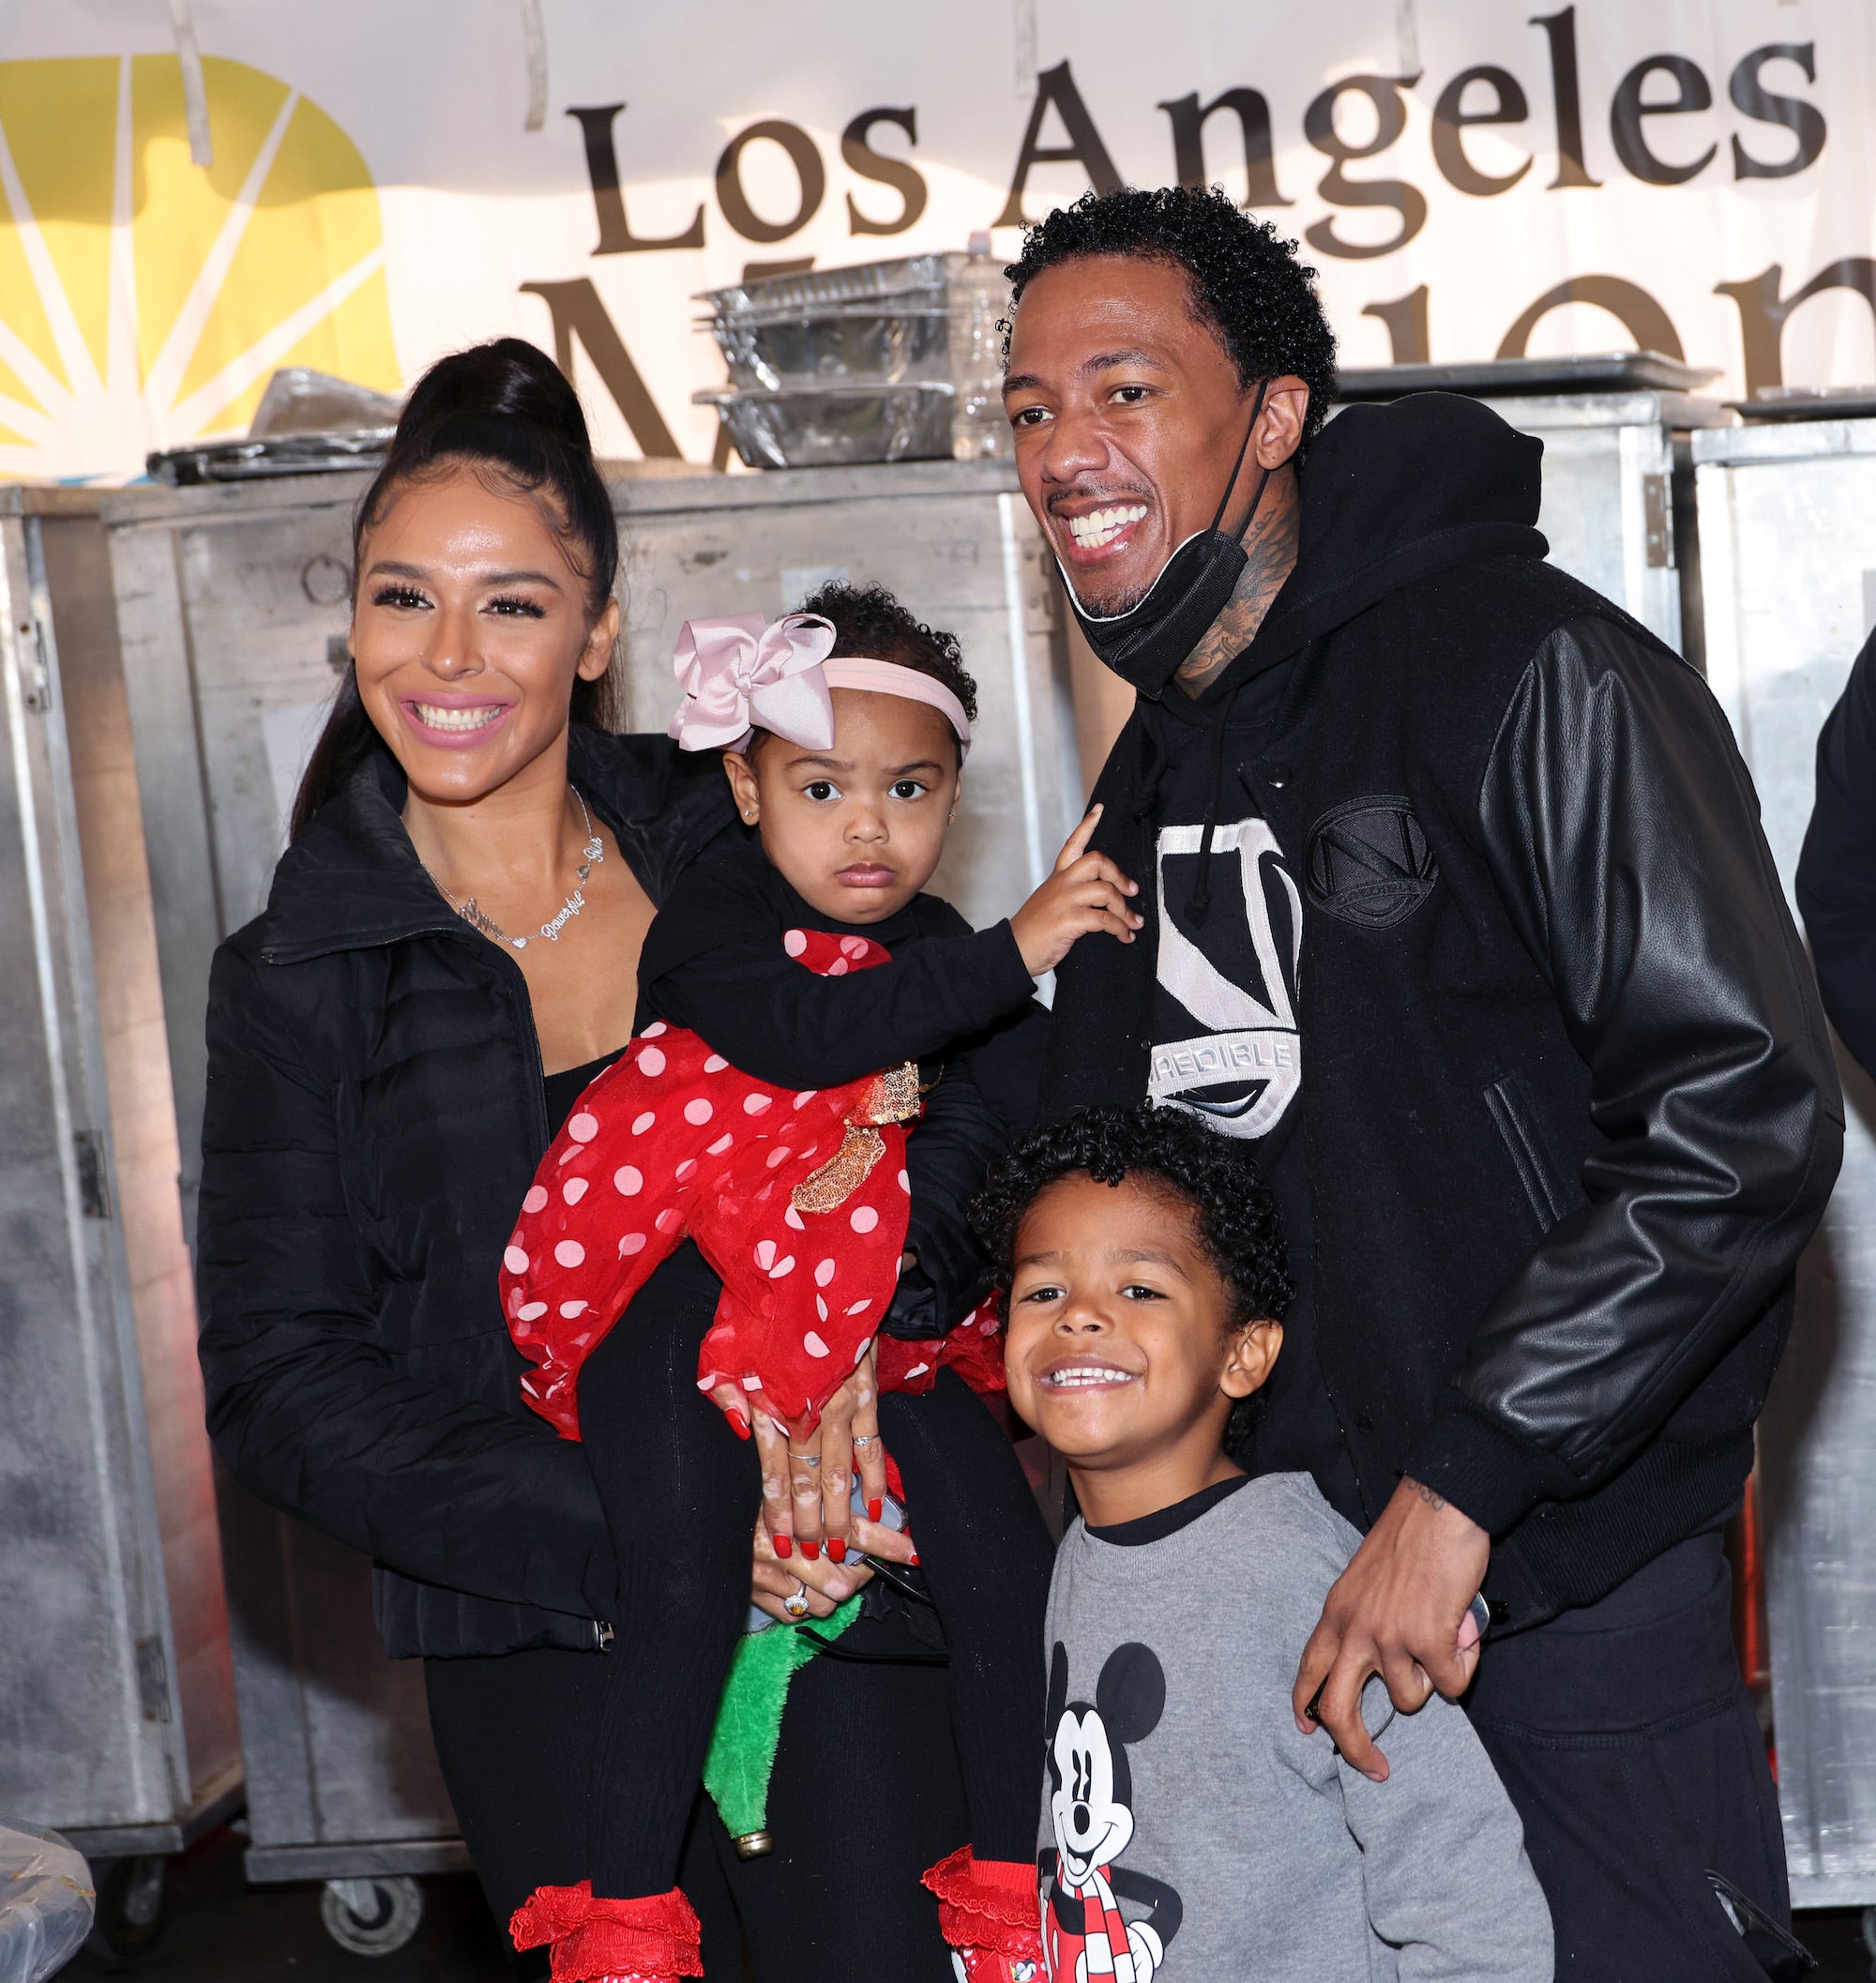 Nick Cannon: father of 12 children, insures his testicles for $10m - Here’s why